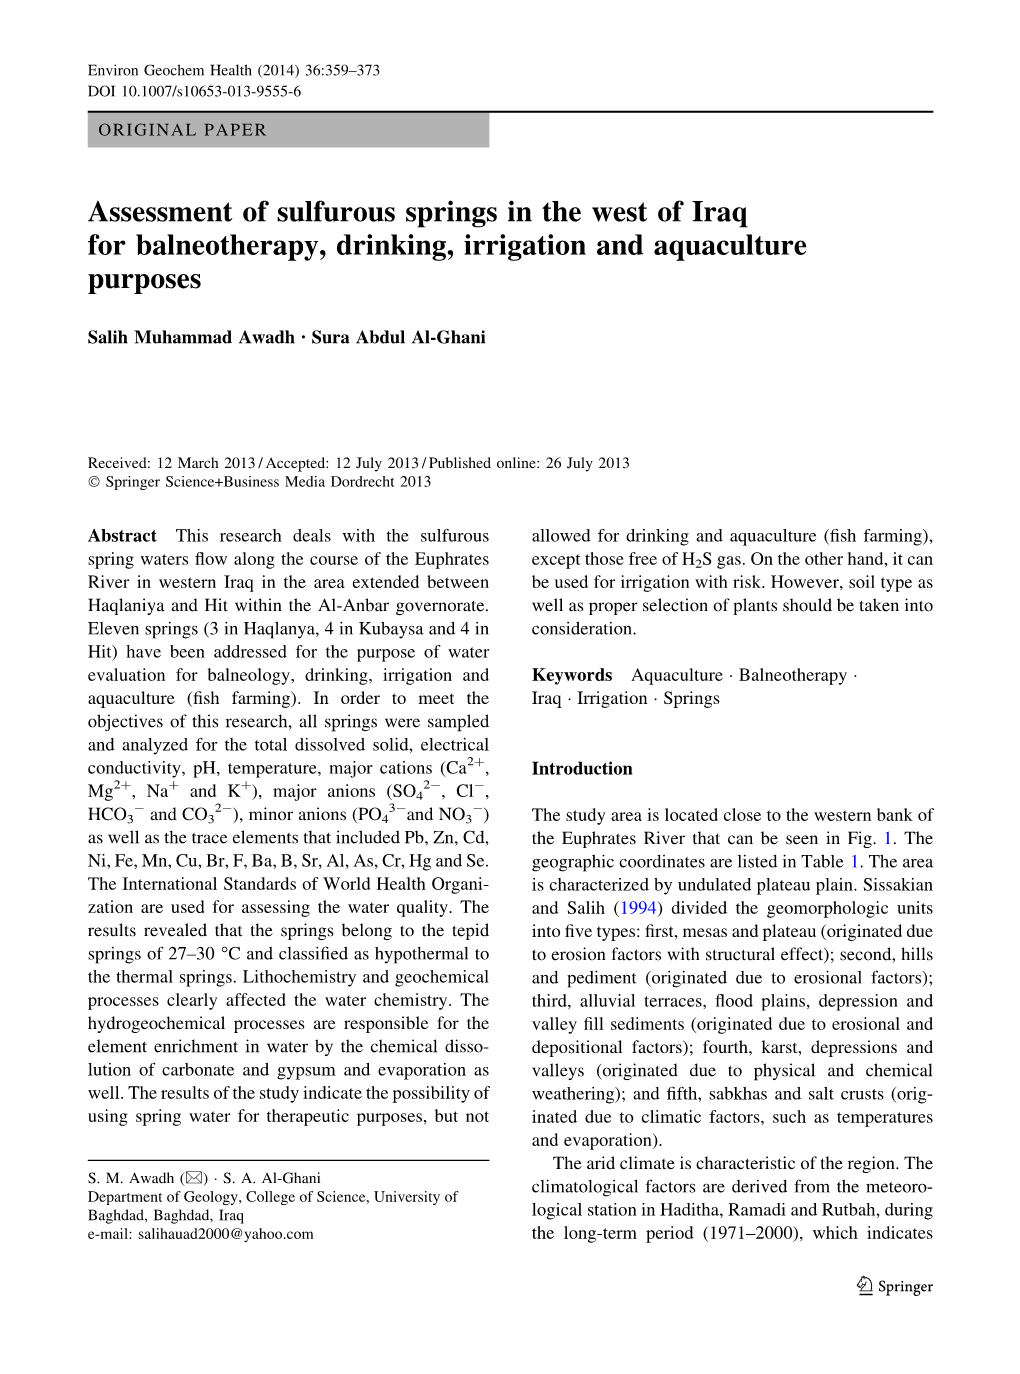 Assessment of Sulfurous Springs in the West of Iraq for Balneotherapy, Drinking, Irrigation and Aquaculture Purposes